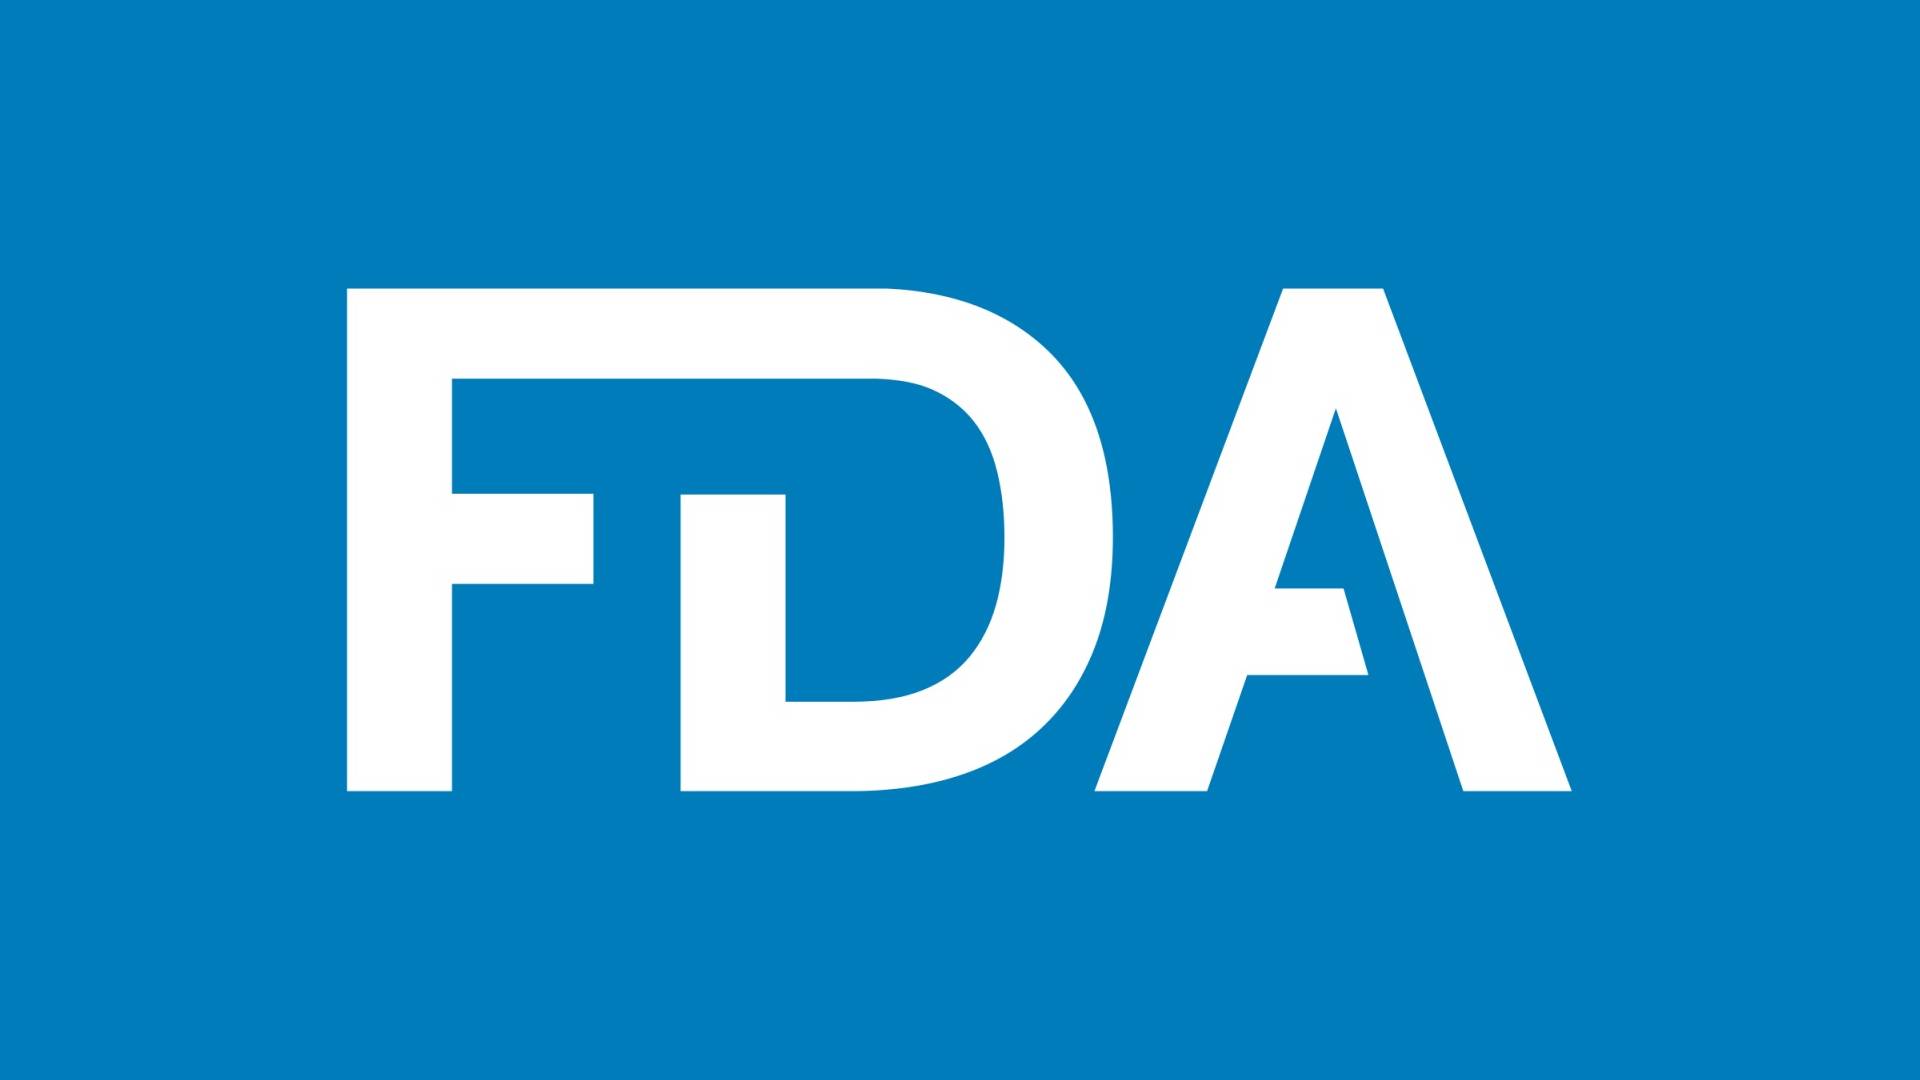 Health News Roundup: FDA classifies recall of Boston Scientific device as 'most serious'; 